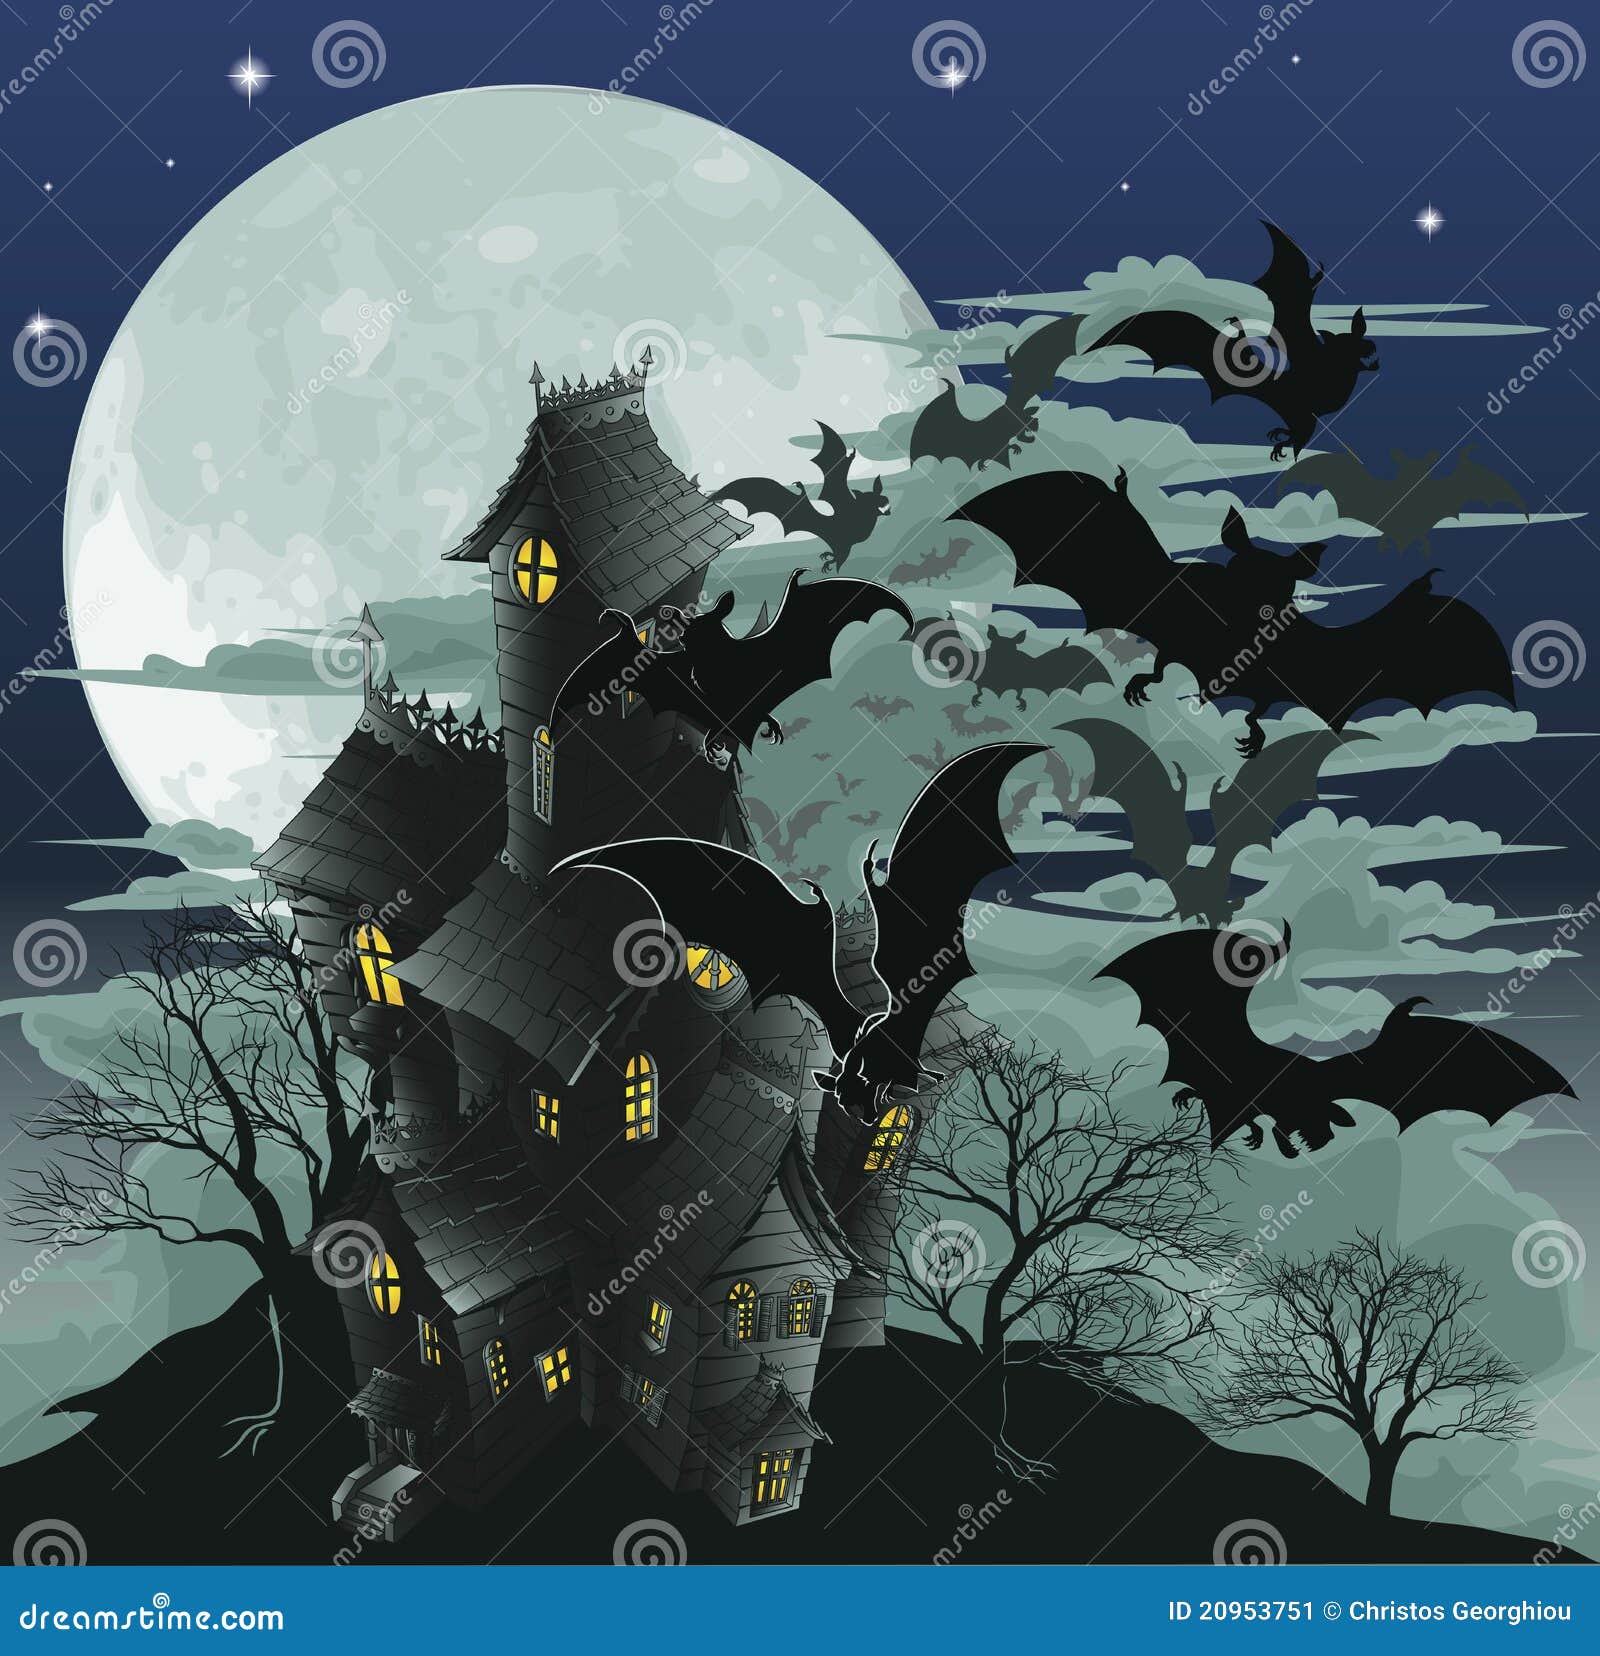 Haunted House And Bats Illustration Stock Vector ...